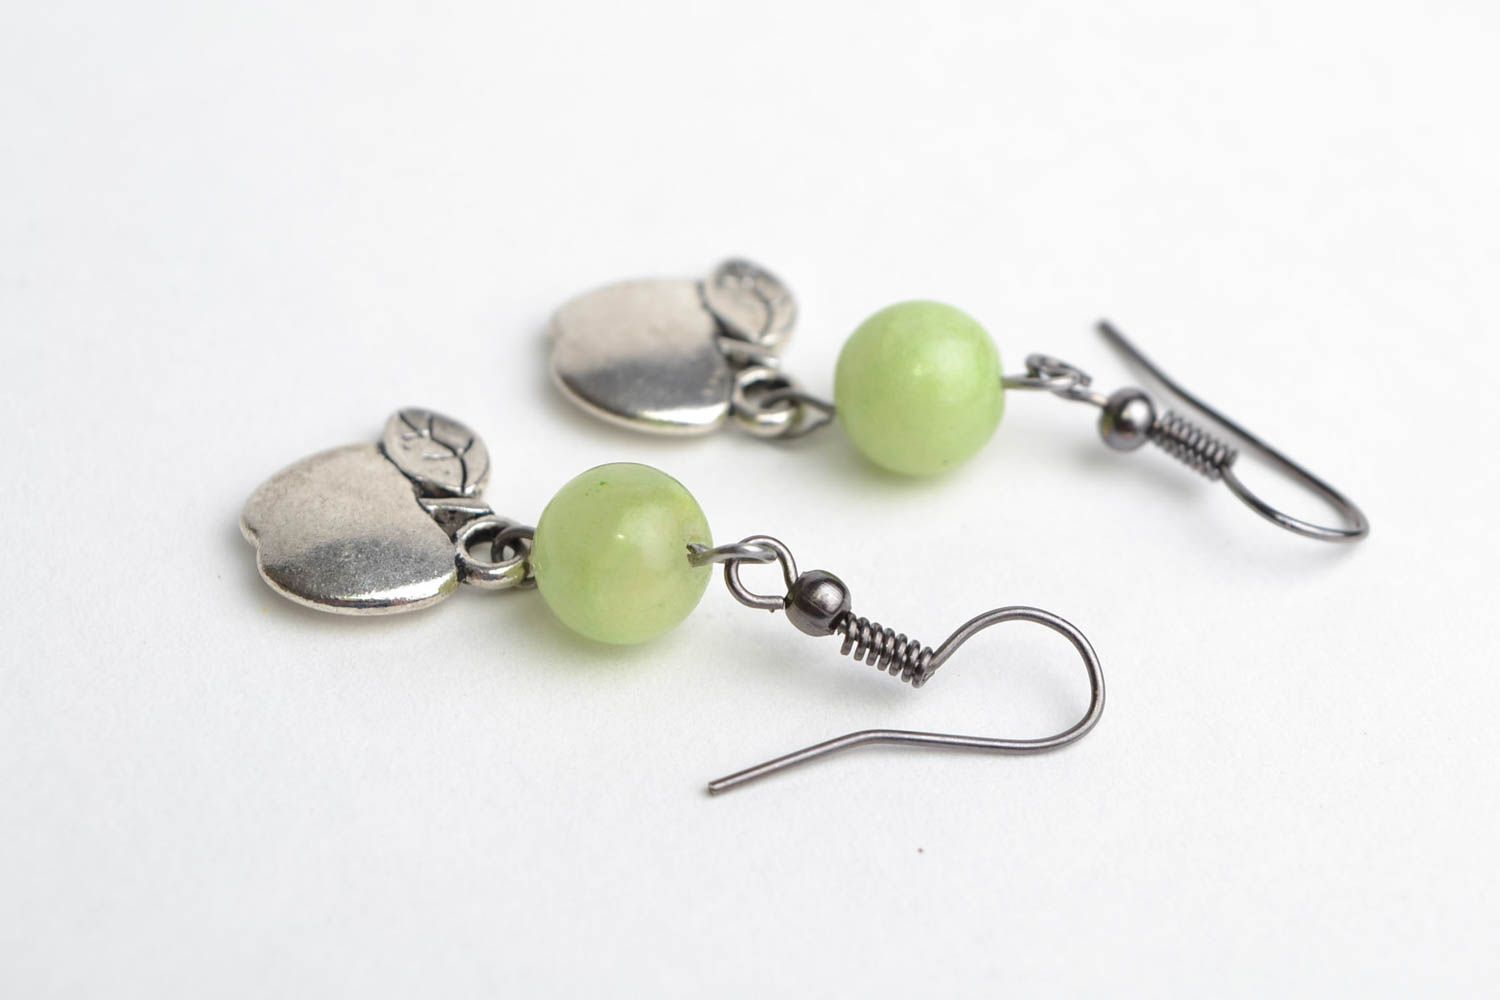 Handmade designer dangling earrings with natural agate and metal charms Apples photo 3